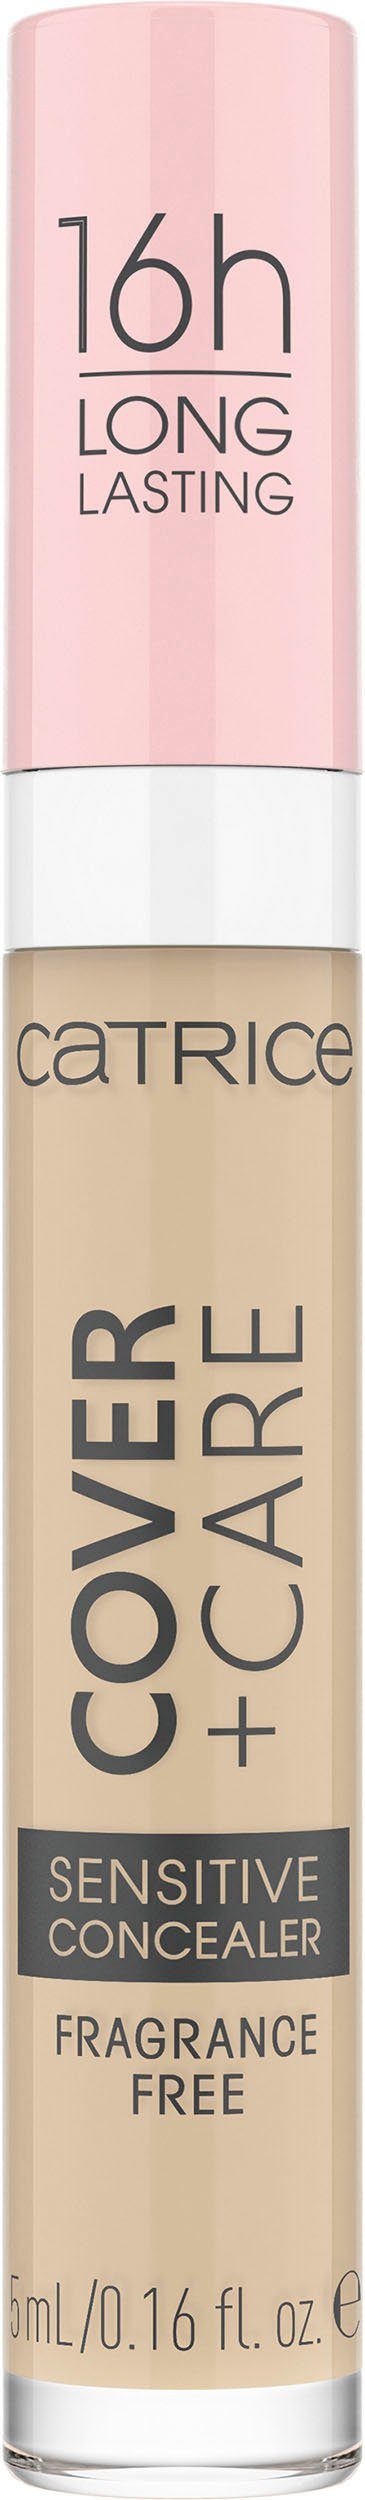 Concealer Catrice Care Catrice Cover + Concealer, Sensitive